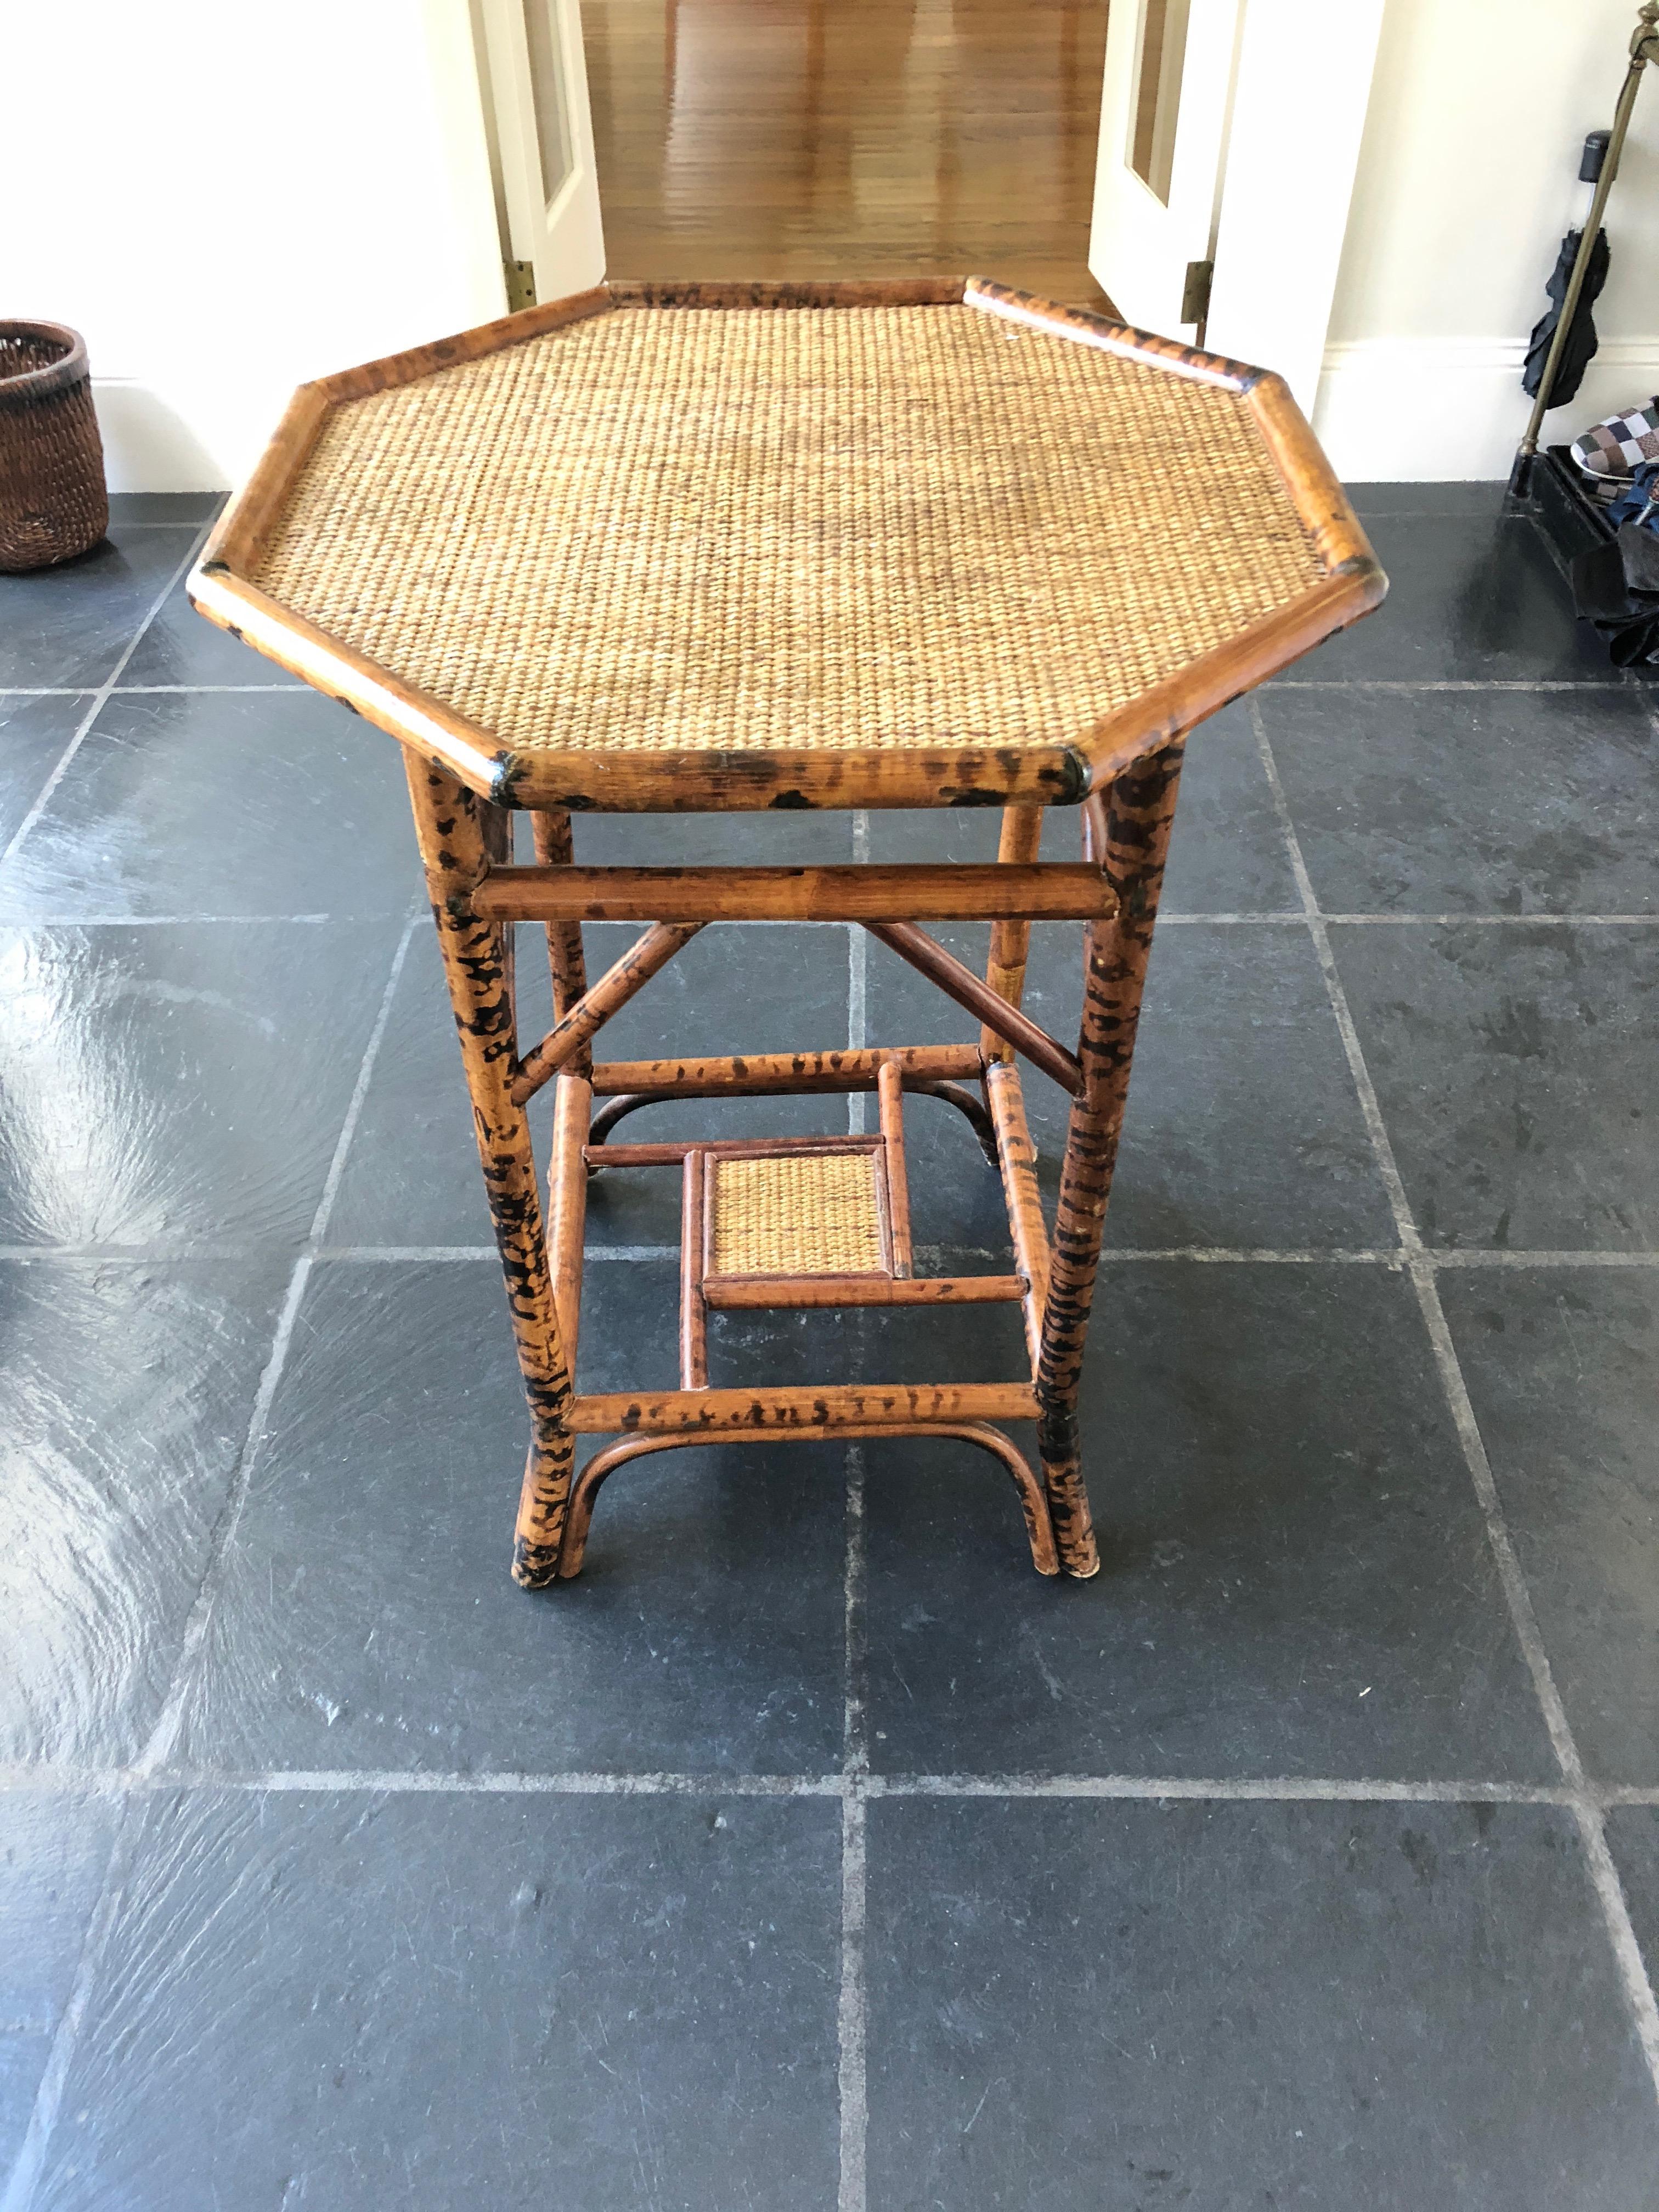 A stylish pair of honey colored and black bamboo and rattan side tables having octagonal tops, elegant legs that splay out at the feet, and a handsome central square in the geometric lower tier.